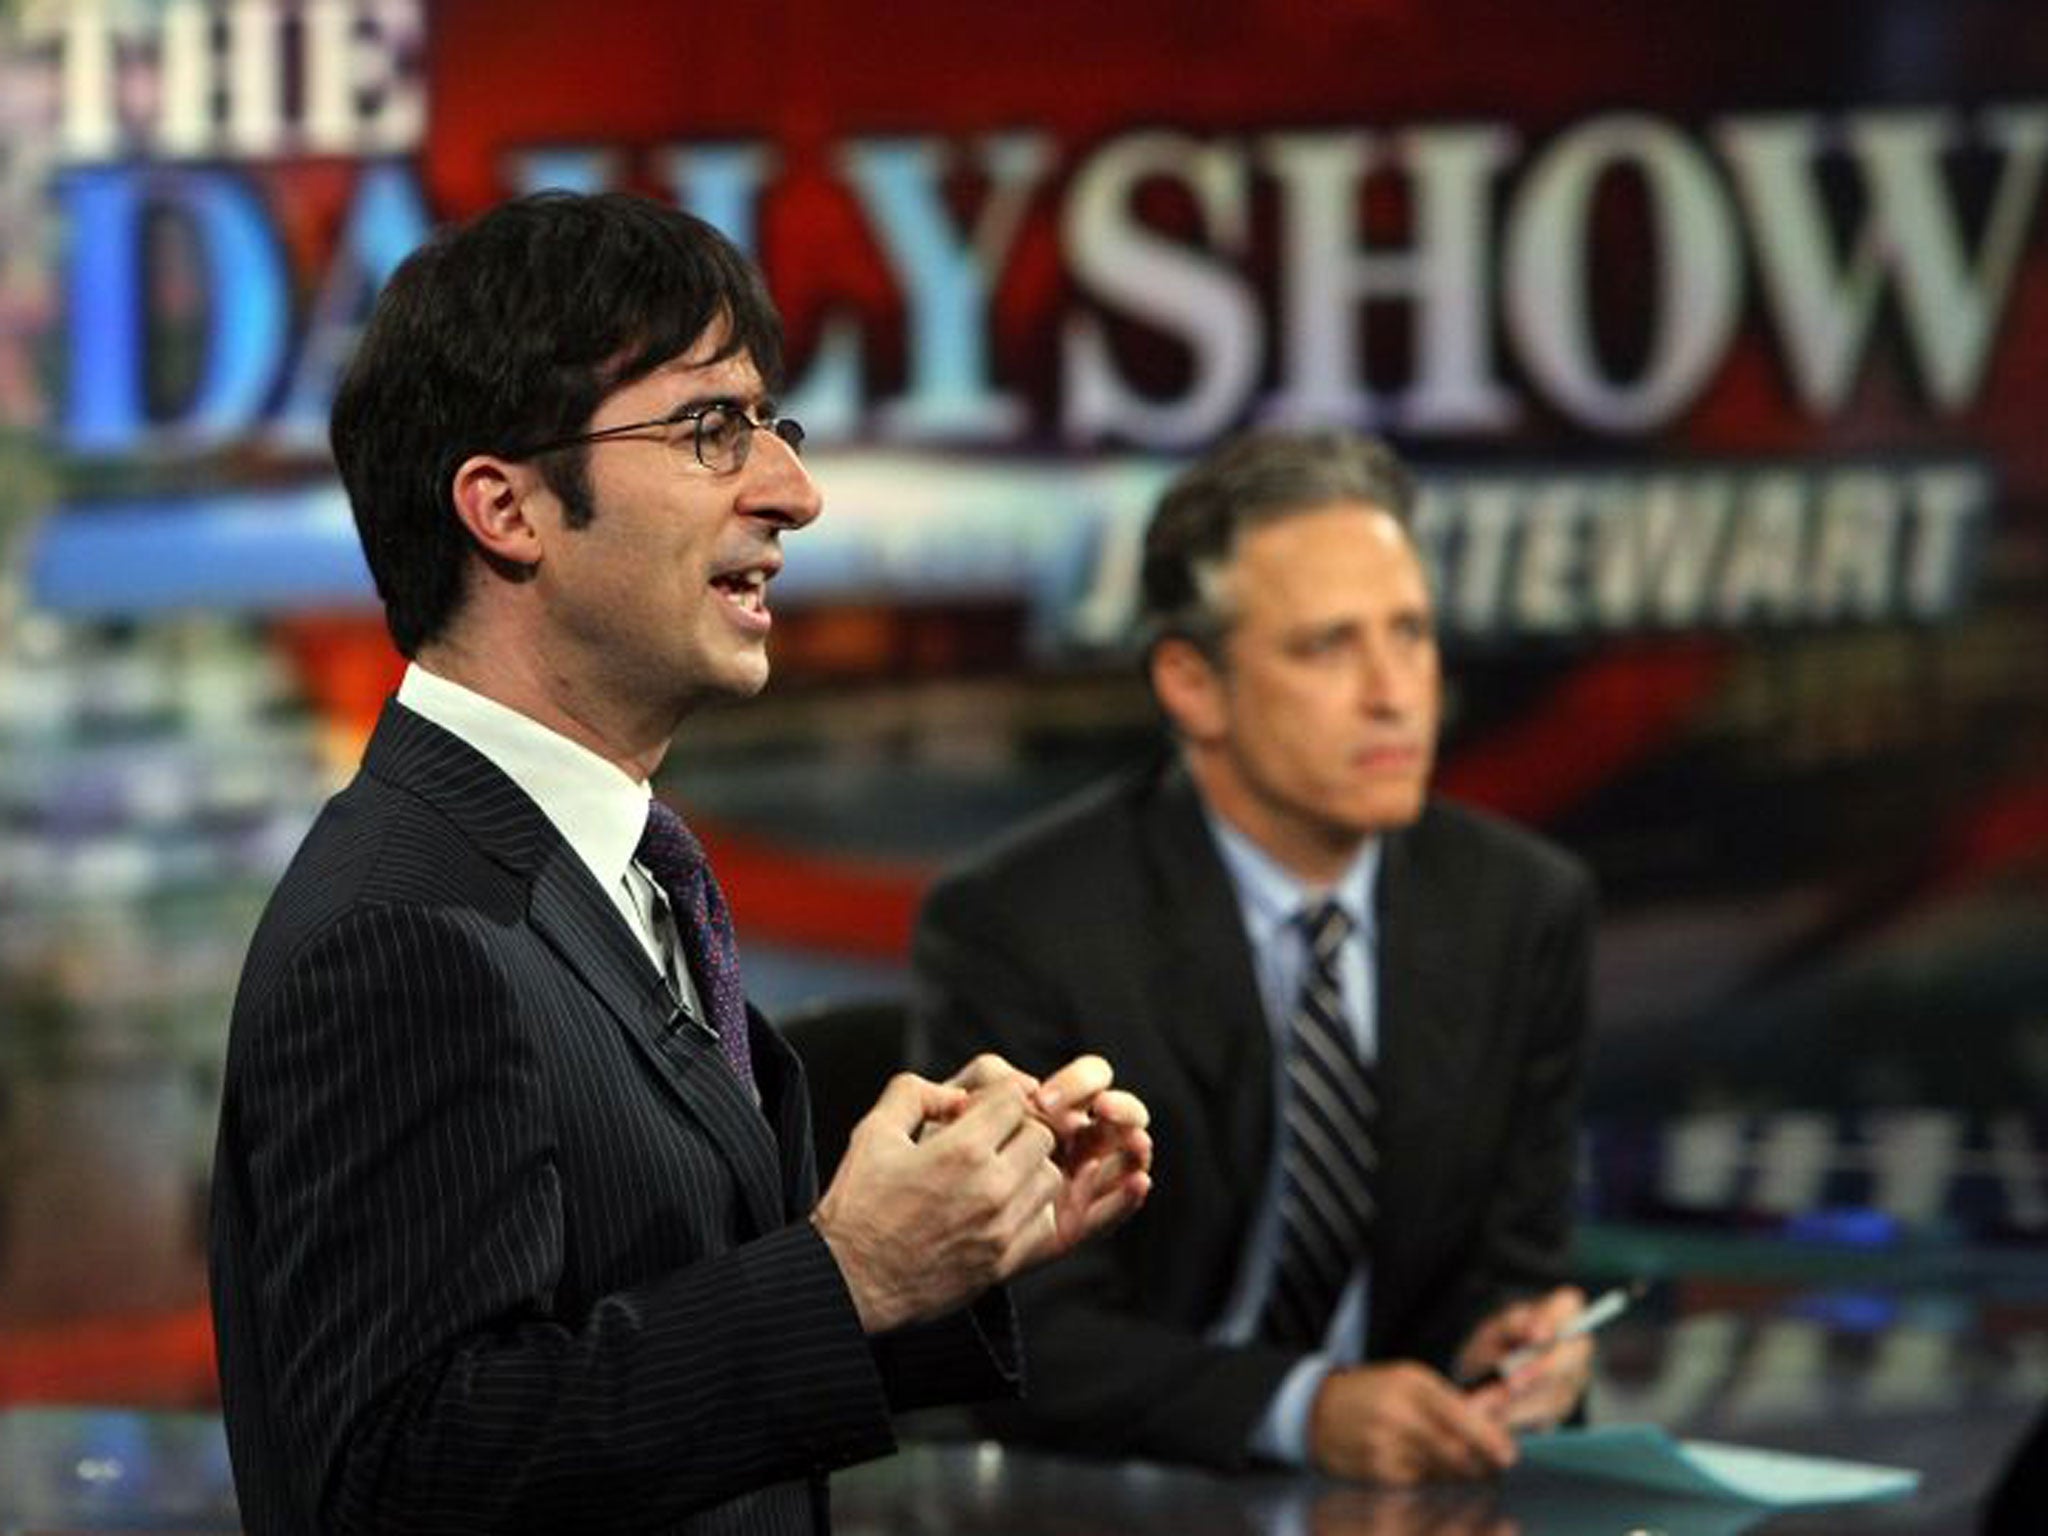 John Oliver The Brit going from sidekick to superstar on 'The Daily